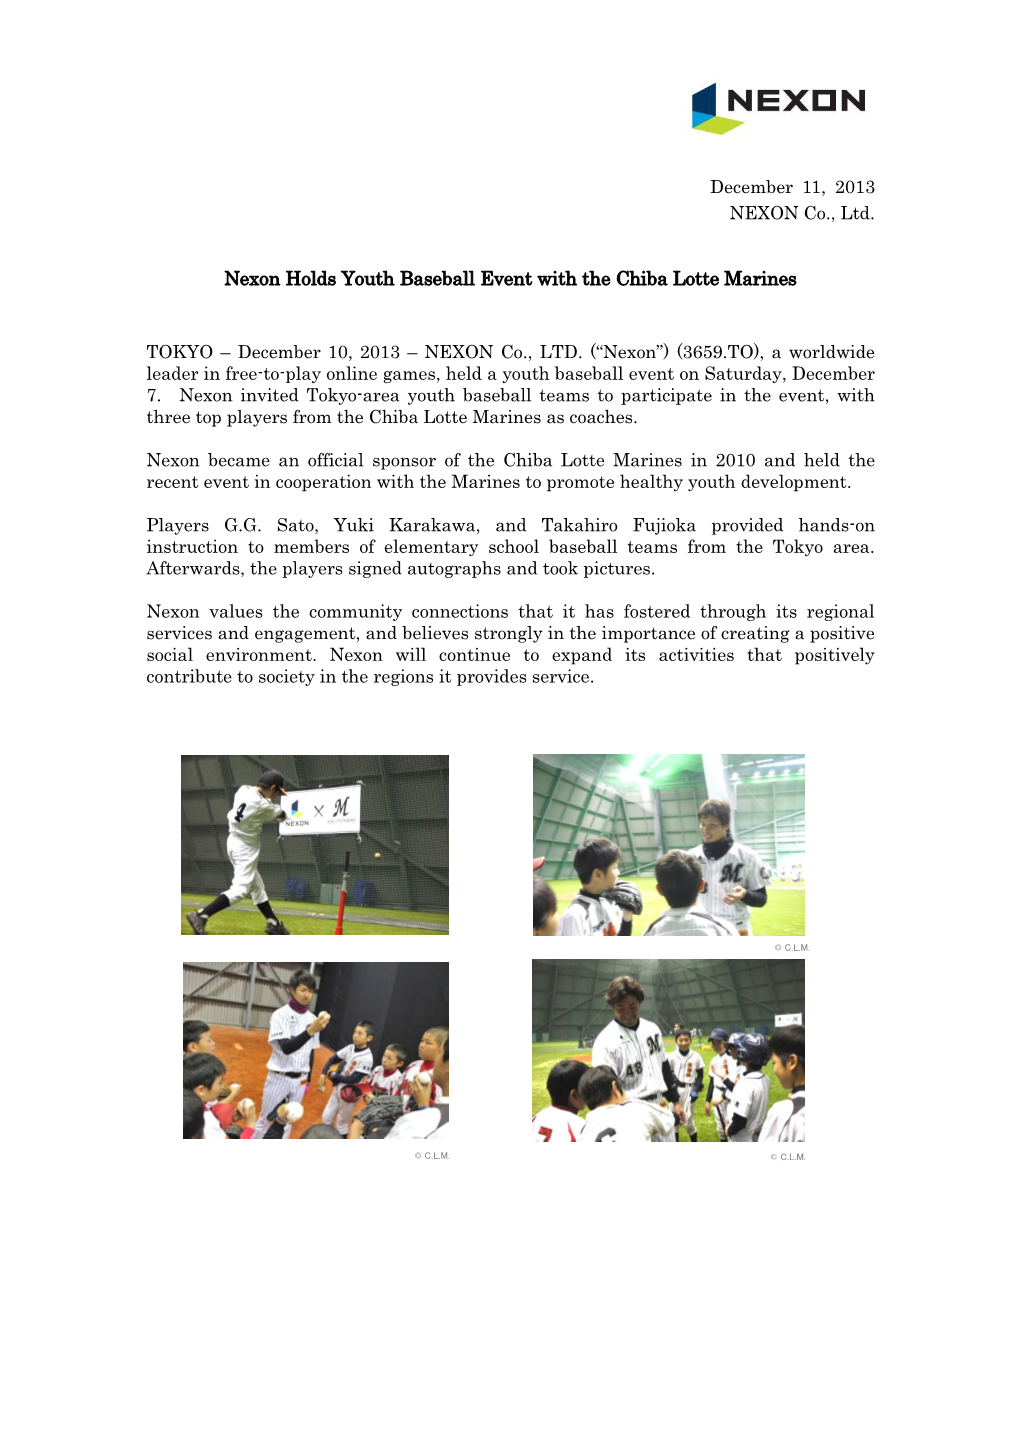 Nexon Holds Youth Baseball Event with the Chiba Lotte Marines